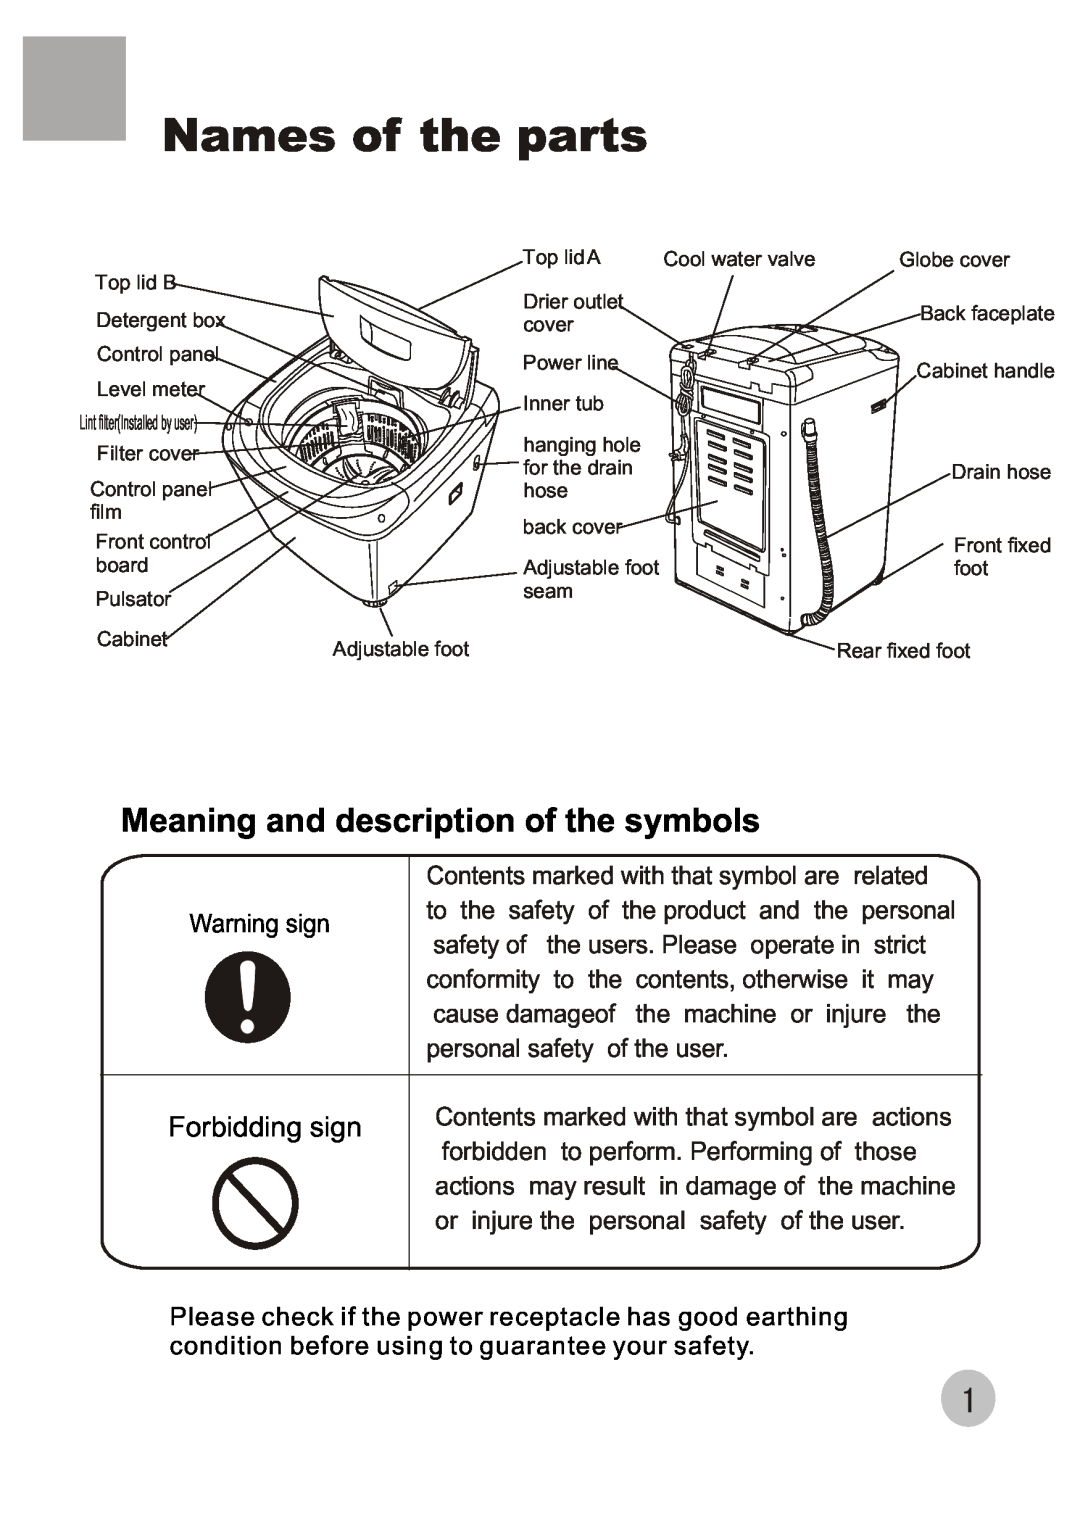 Haier HWM80-68B user manual Names of the parts, Meaning and description of the symbols, Forbidding sign 